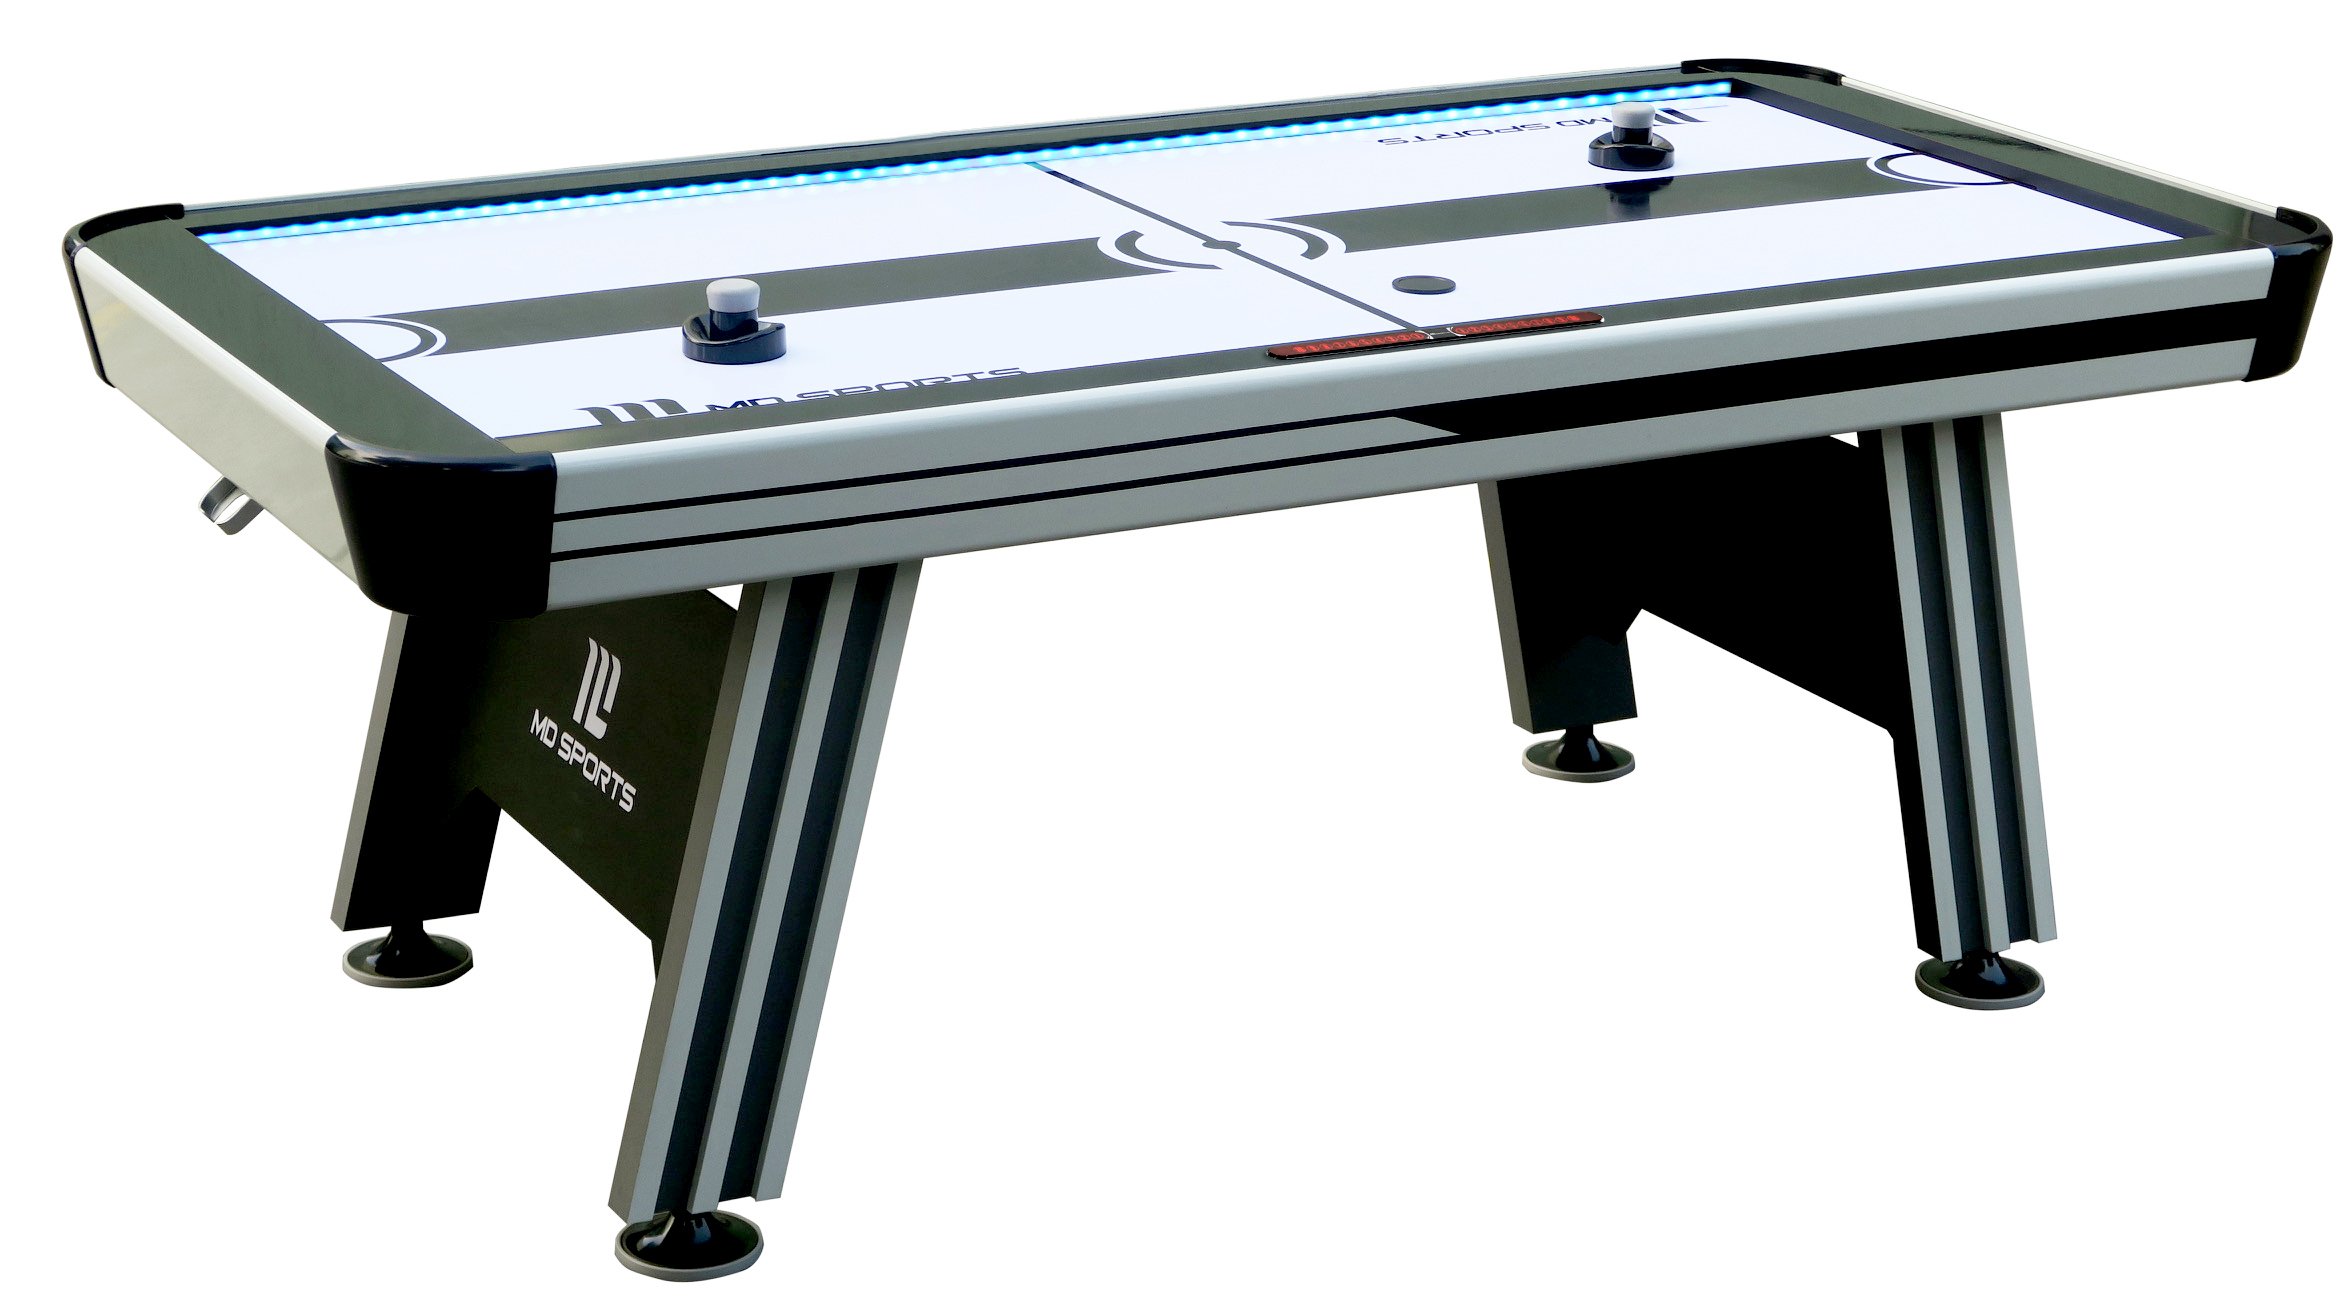 Md Sports Air Hockey Table For Adults And Kids With Led Lights And Sound Effects - Multiplayer Air Powered Hockey Tables For Hom